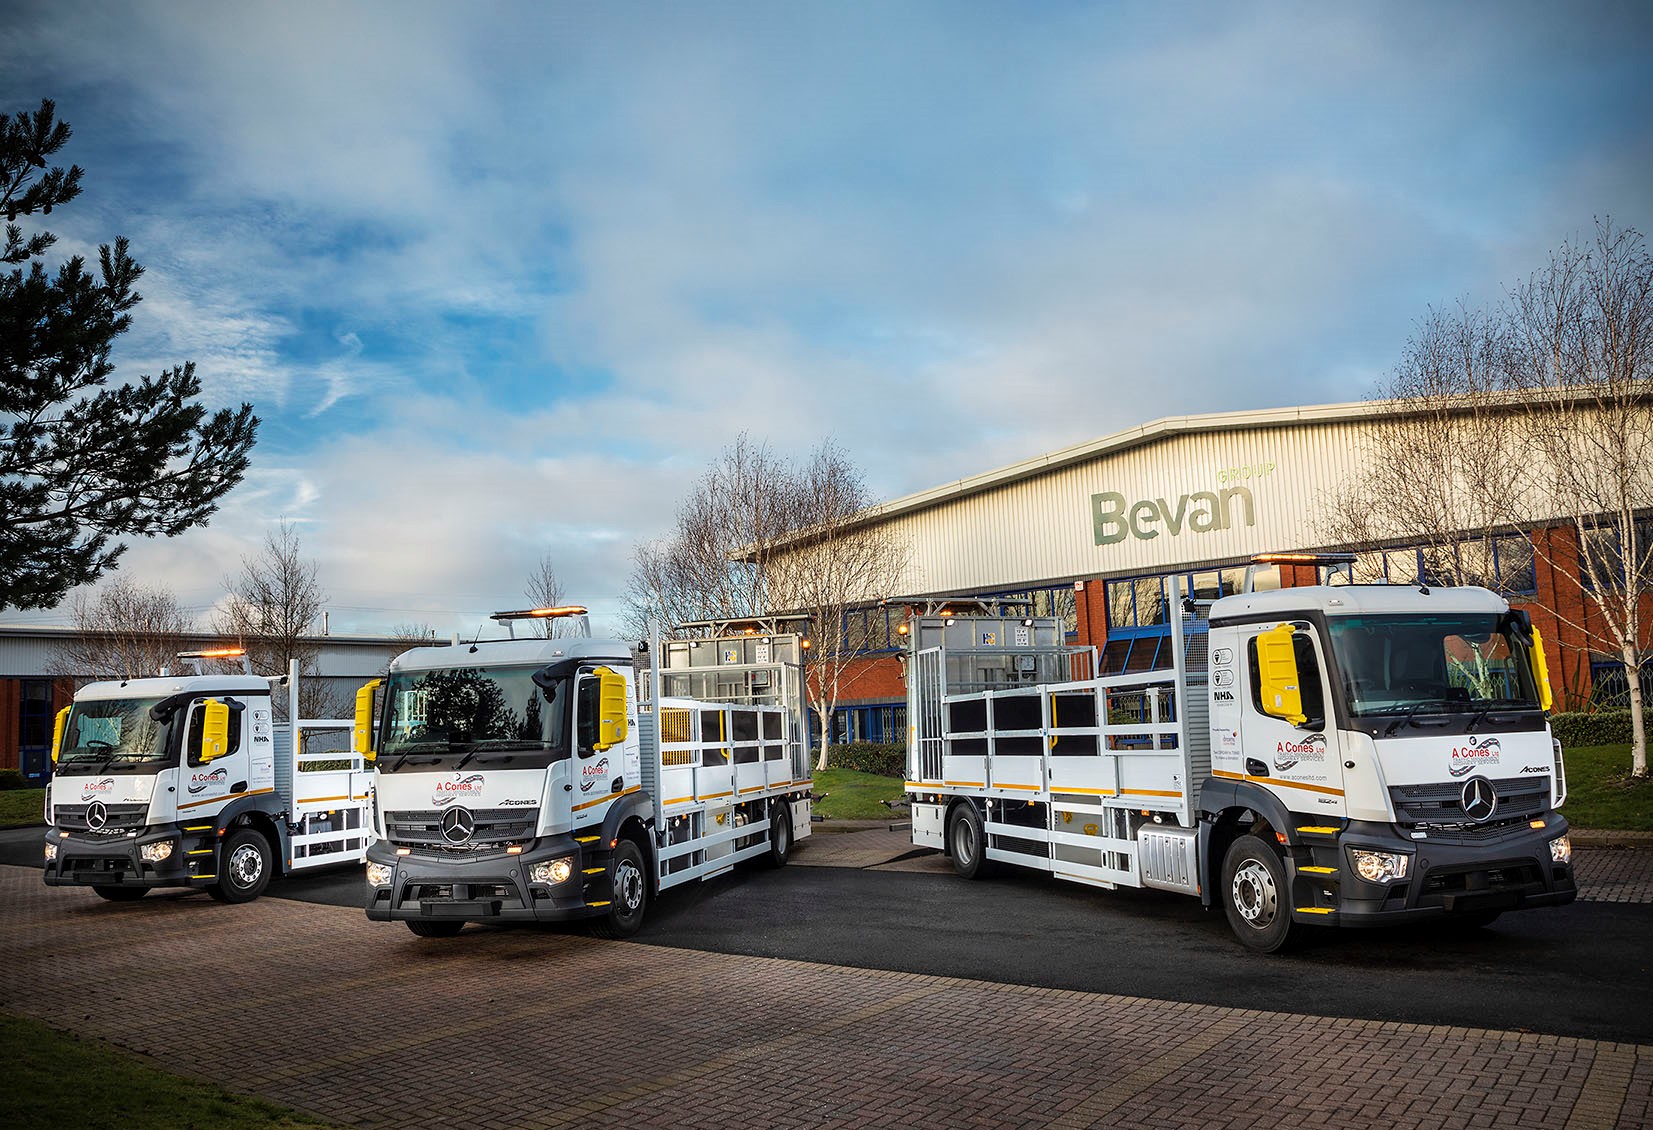 Partners embark on a new road to success with 10 bespoke impact protection vehicles for A Cones